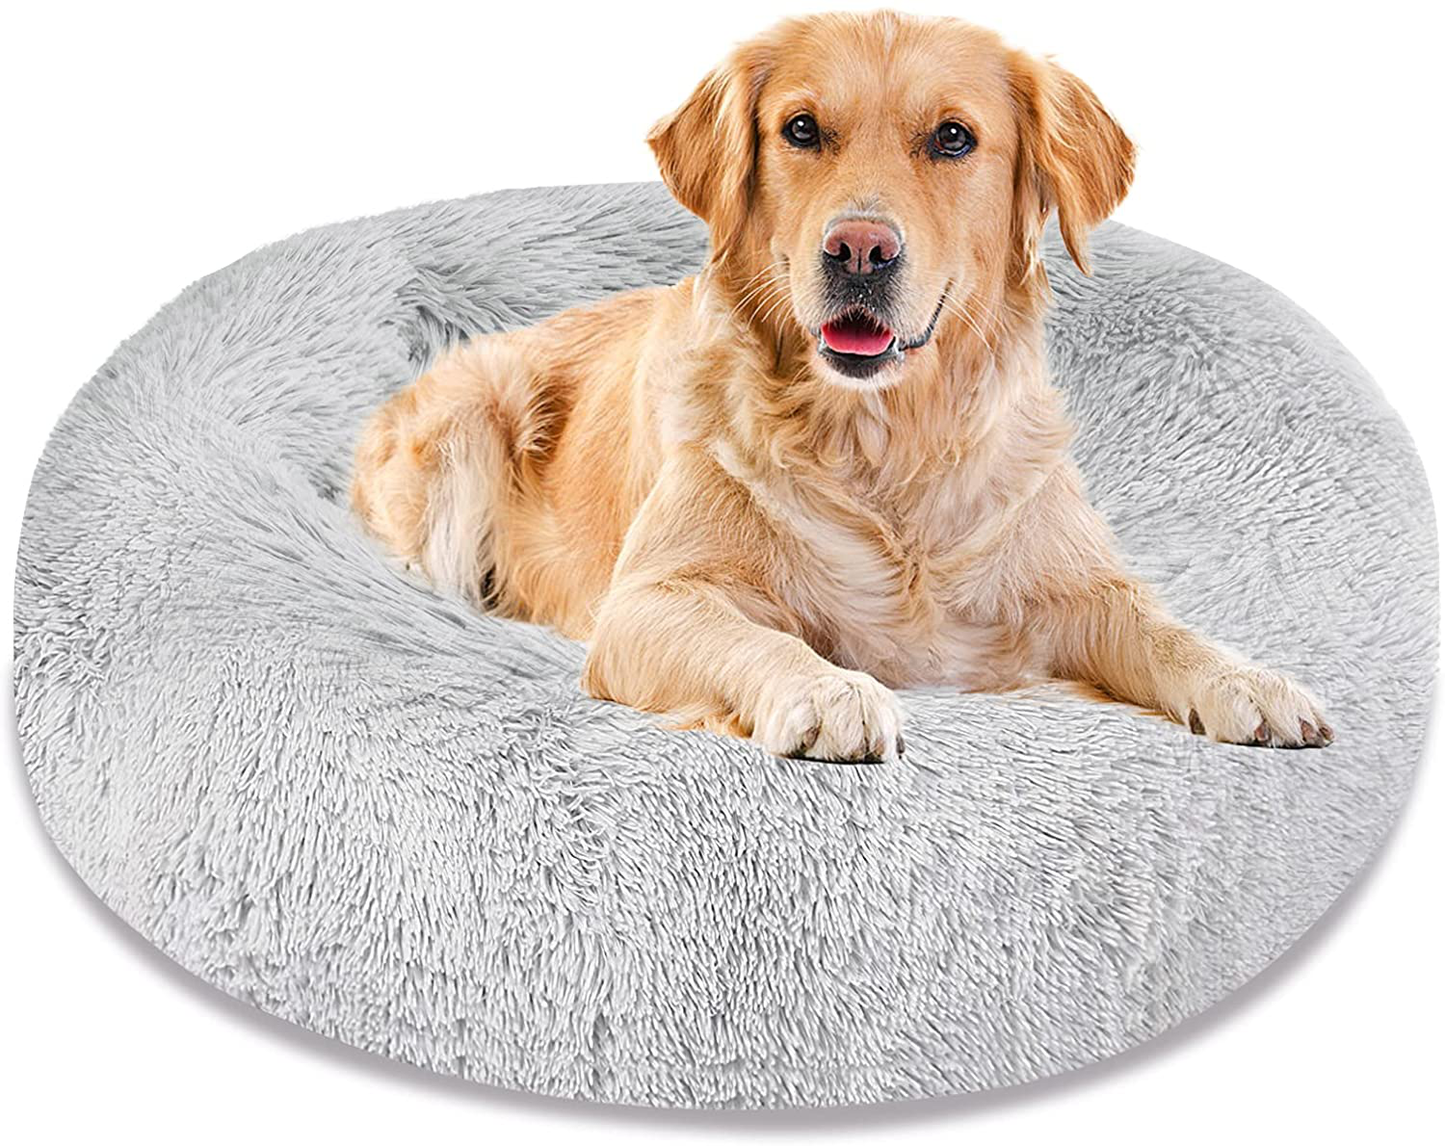 Dog Bed & Cat Bed, Calming Anti-Anxiety Donut Dog Cuddler Bed, Machine Washable round Pet Bed, Comfy Faux Fur Plush Dog Cat Bed for Small Medium Large Dogs and Cats